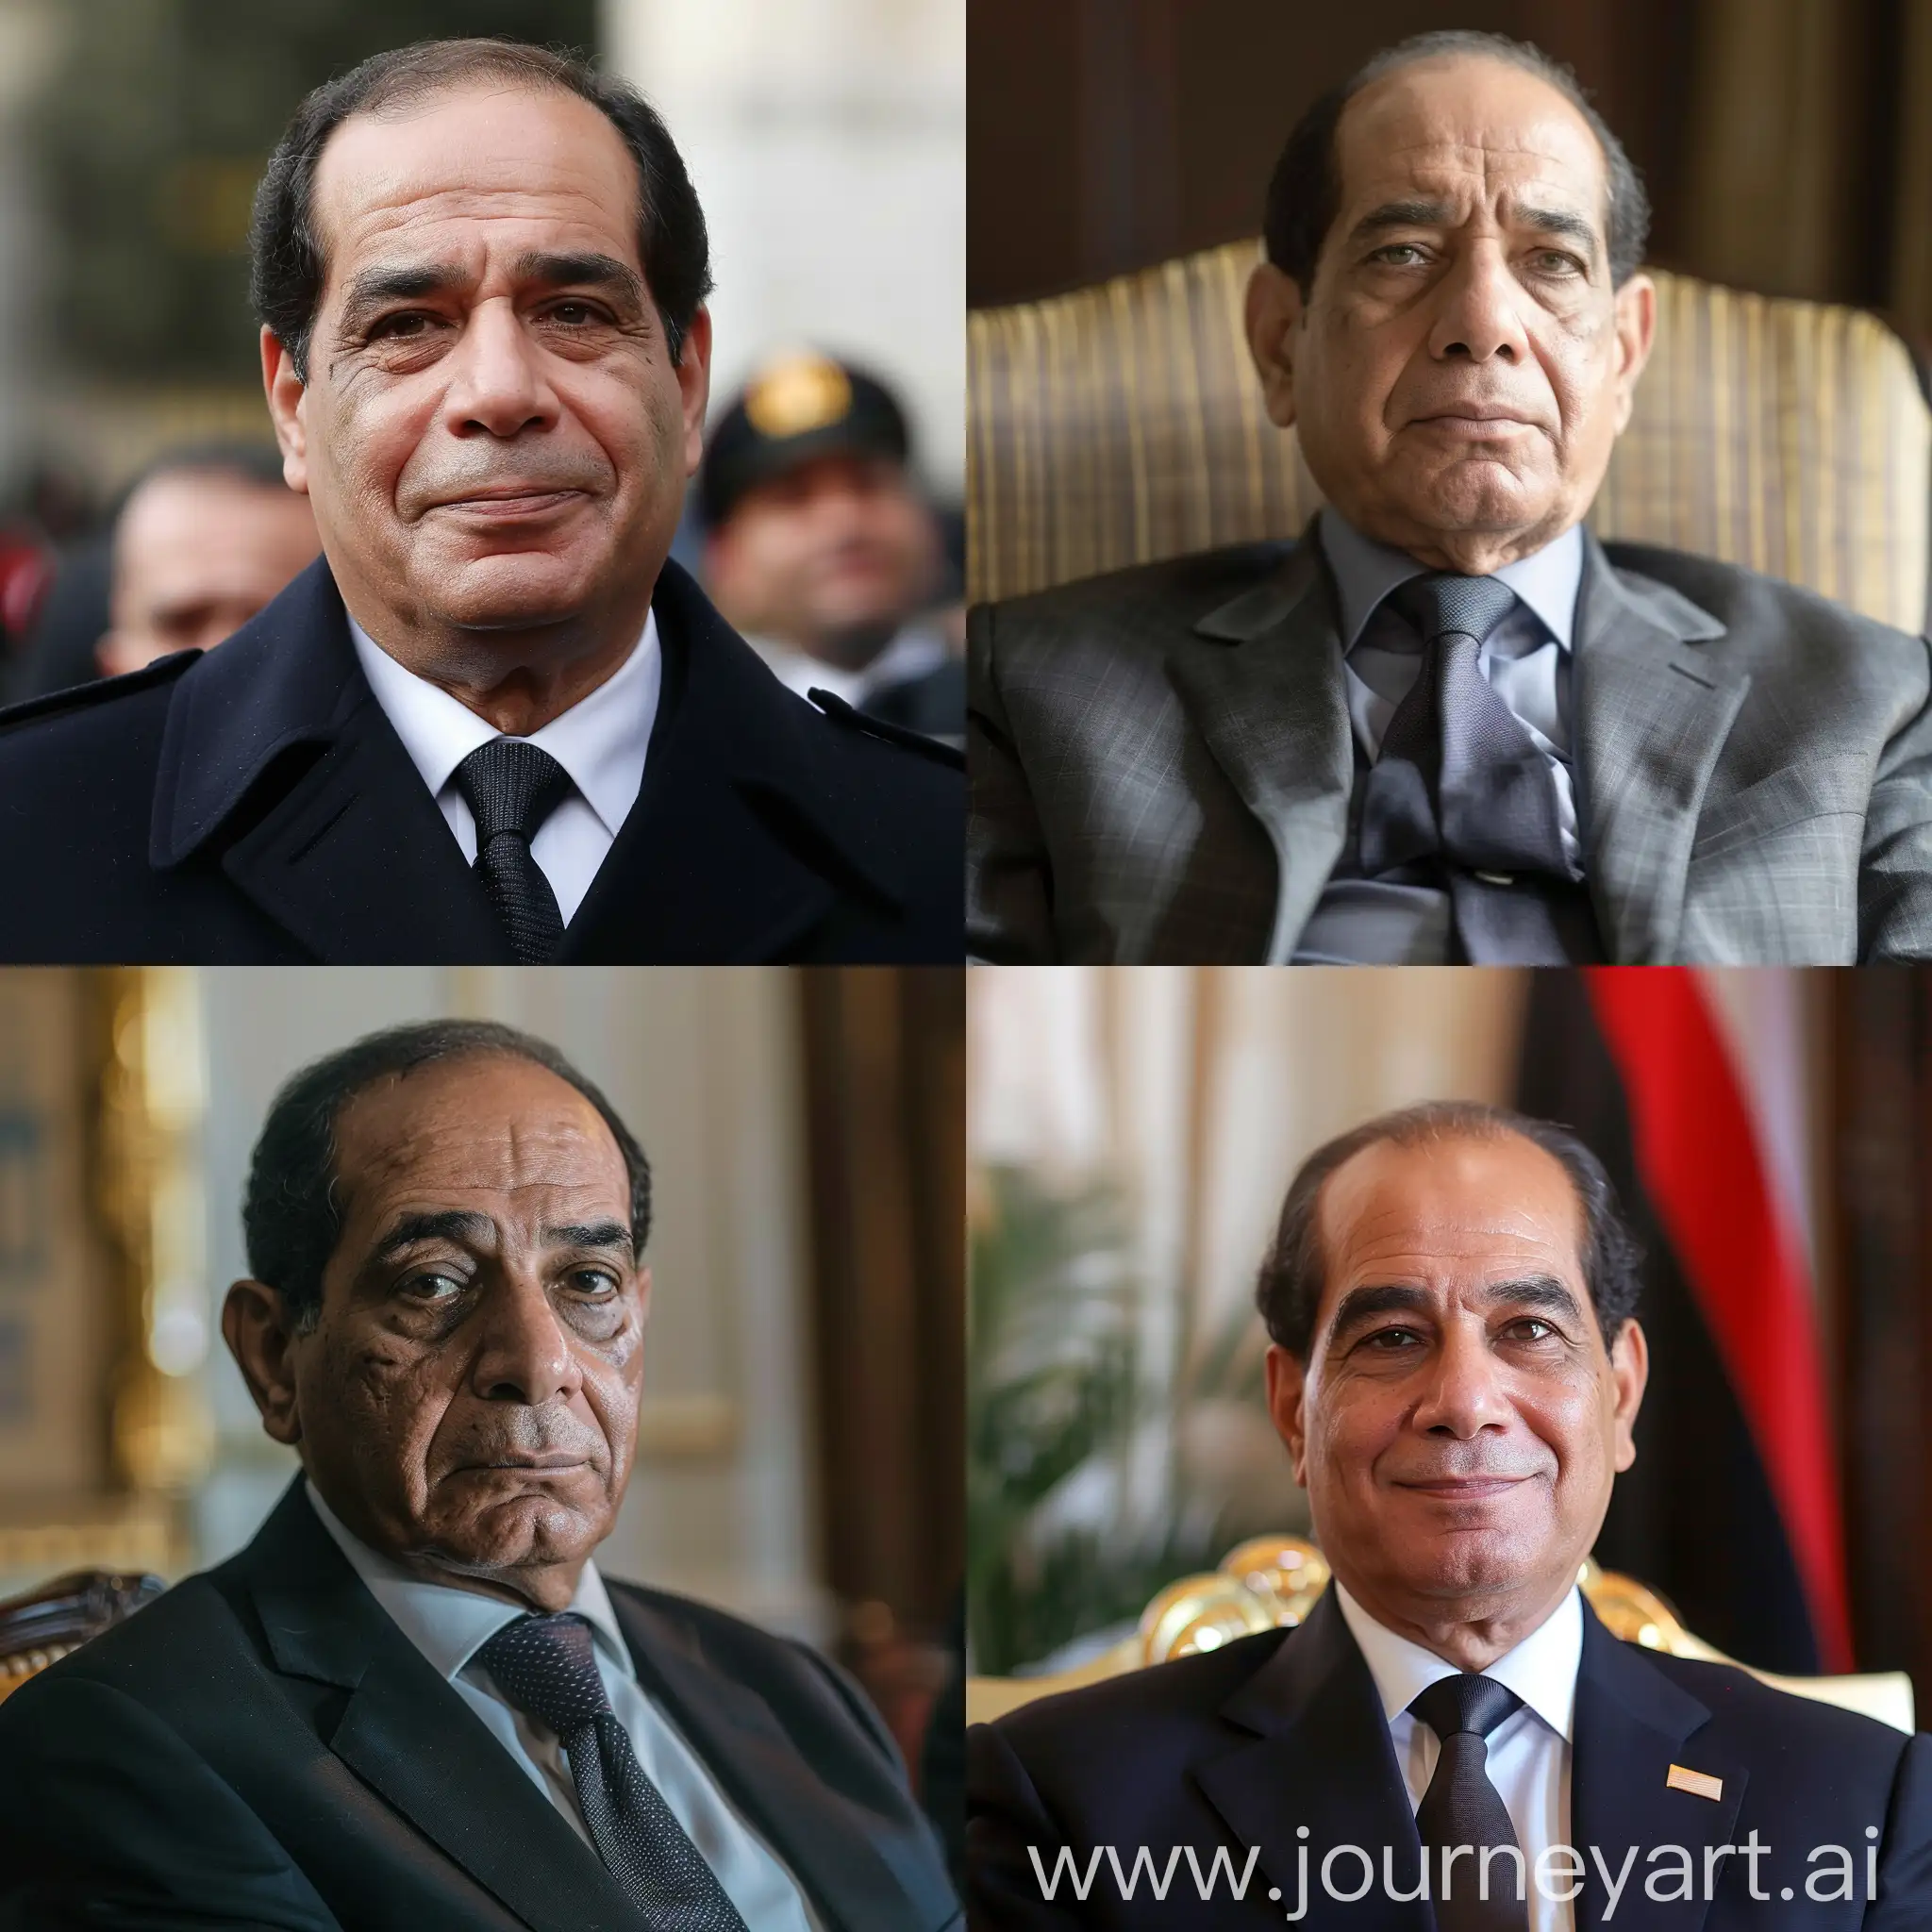 Alzheimers-Impact-President-of-Egypt-in-a-Thoughtful-Moment